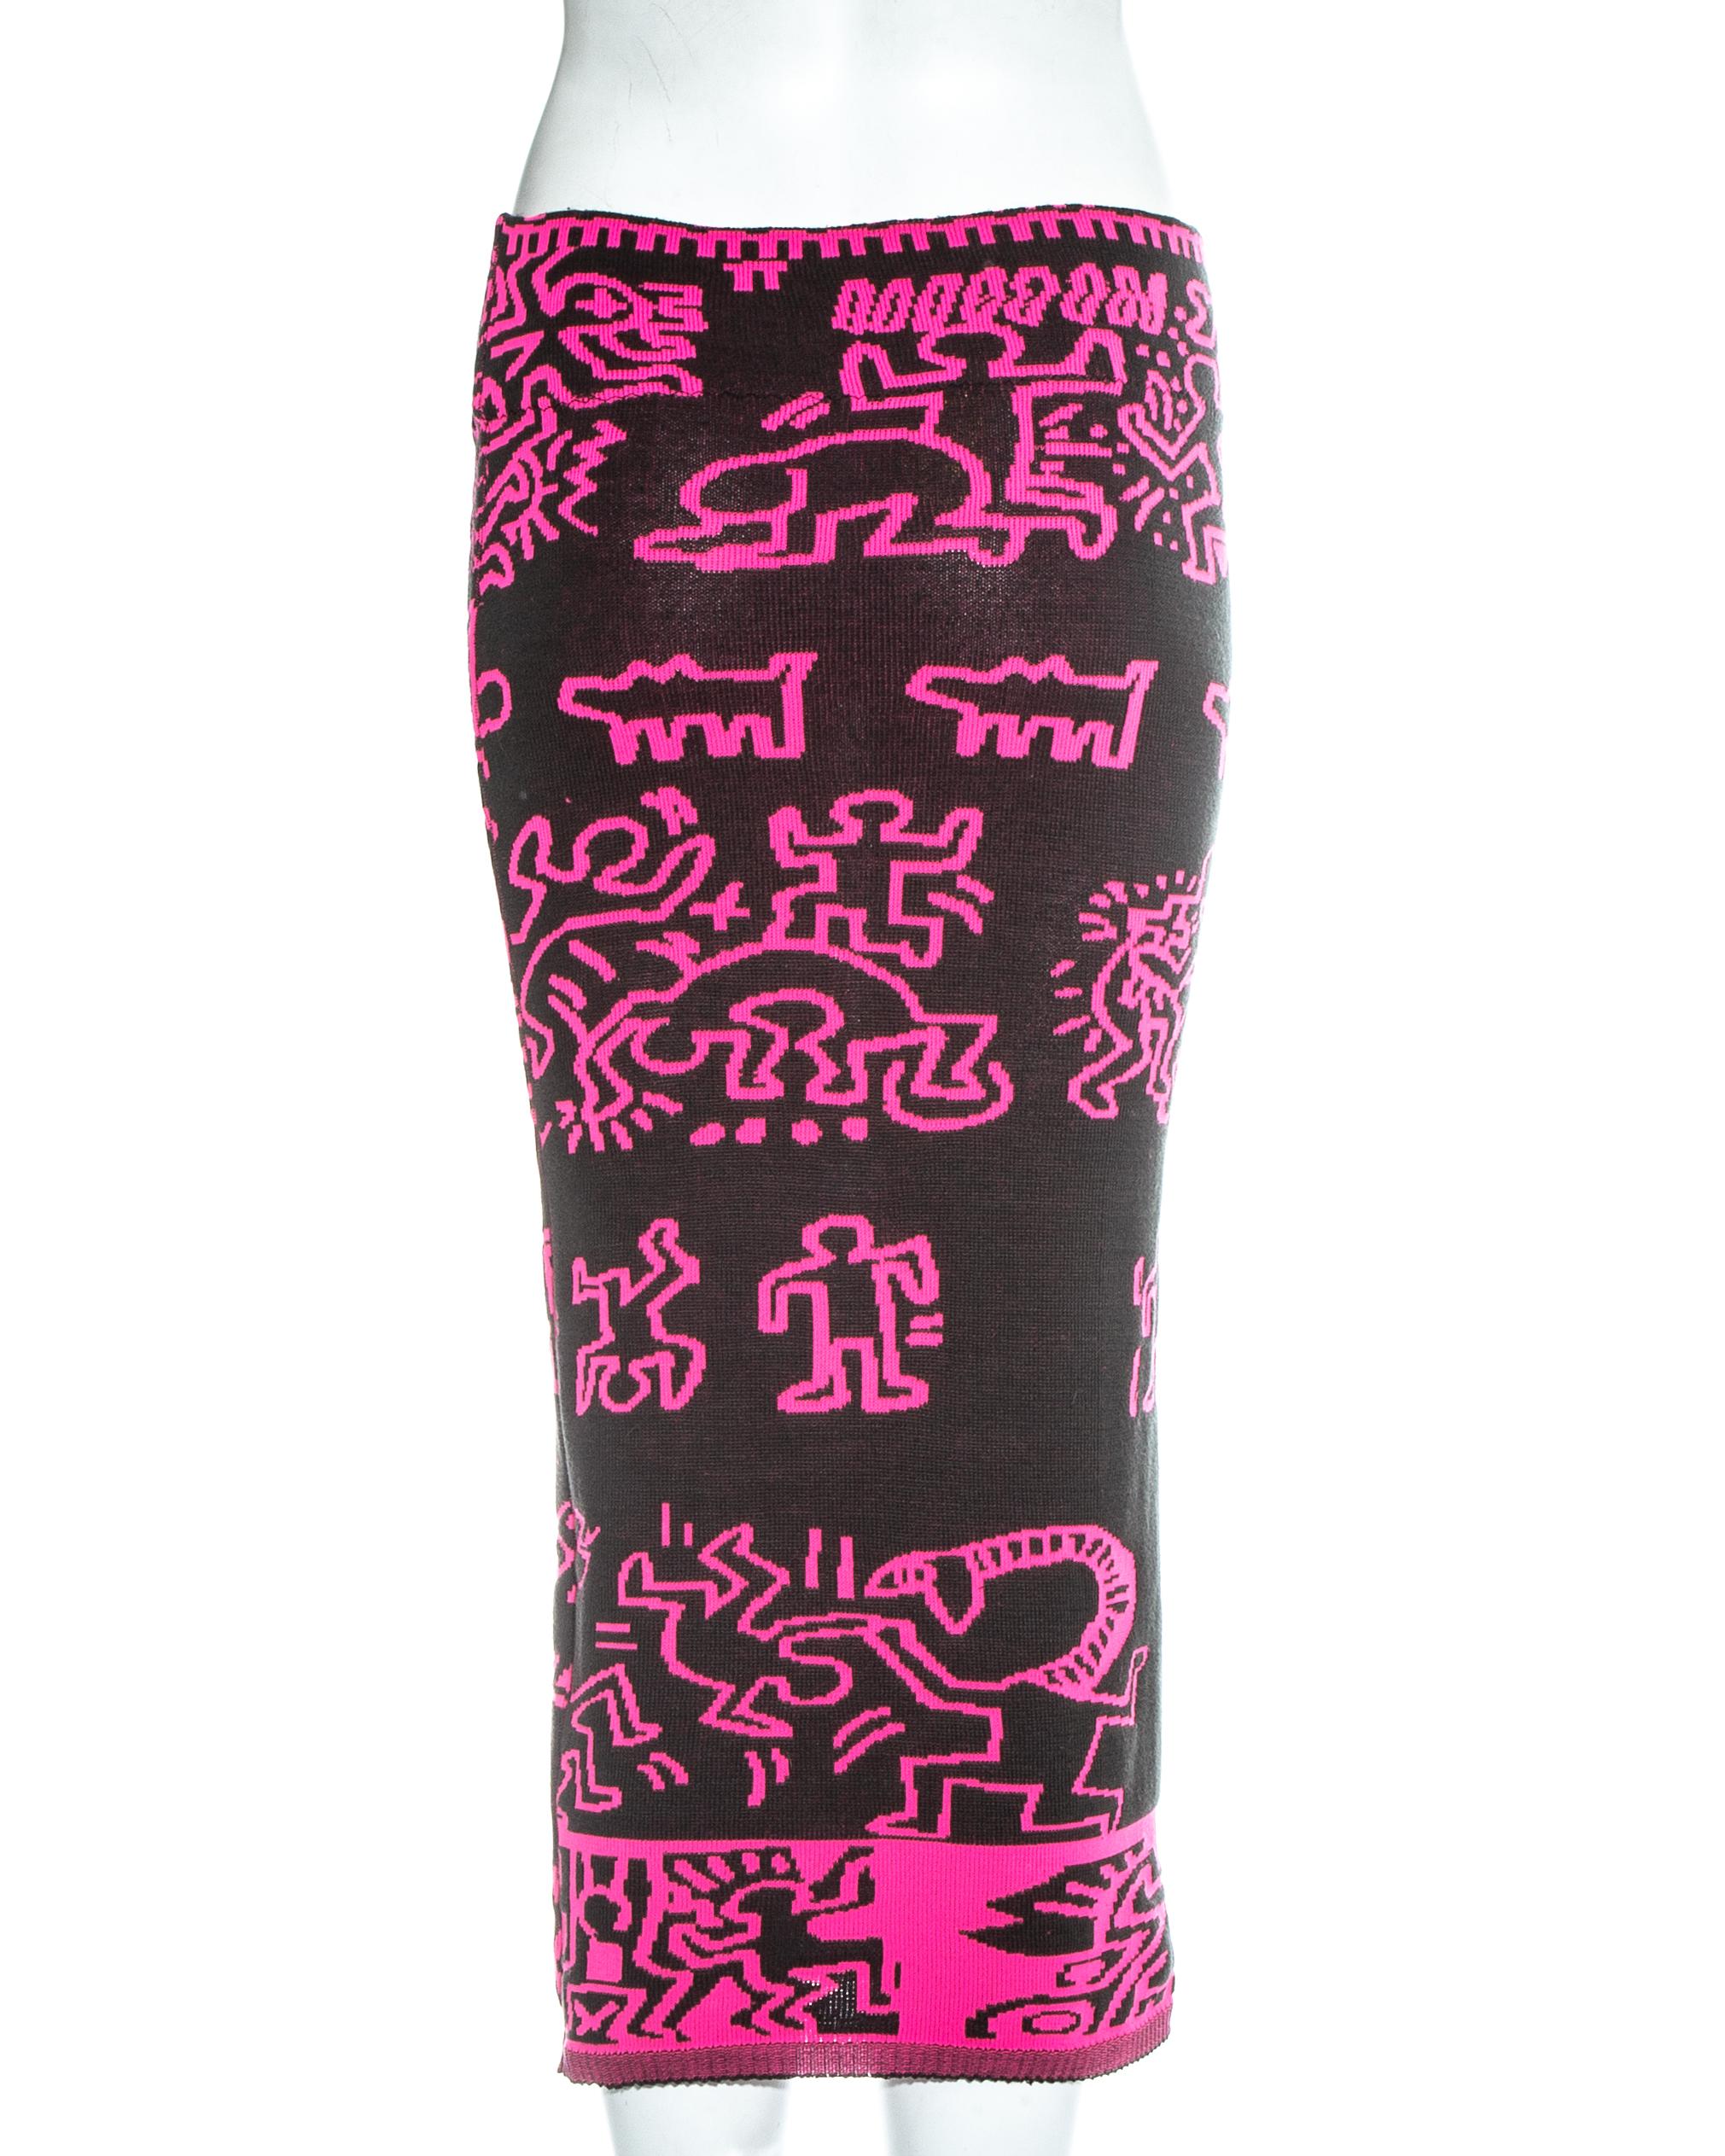 Vivienne Westwood & Malcolm McLaren Worlds End Keith Haring skirt, fw 1983 In Excellent Condition In London, GB